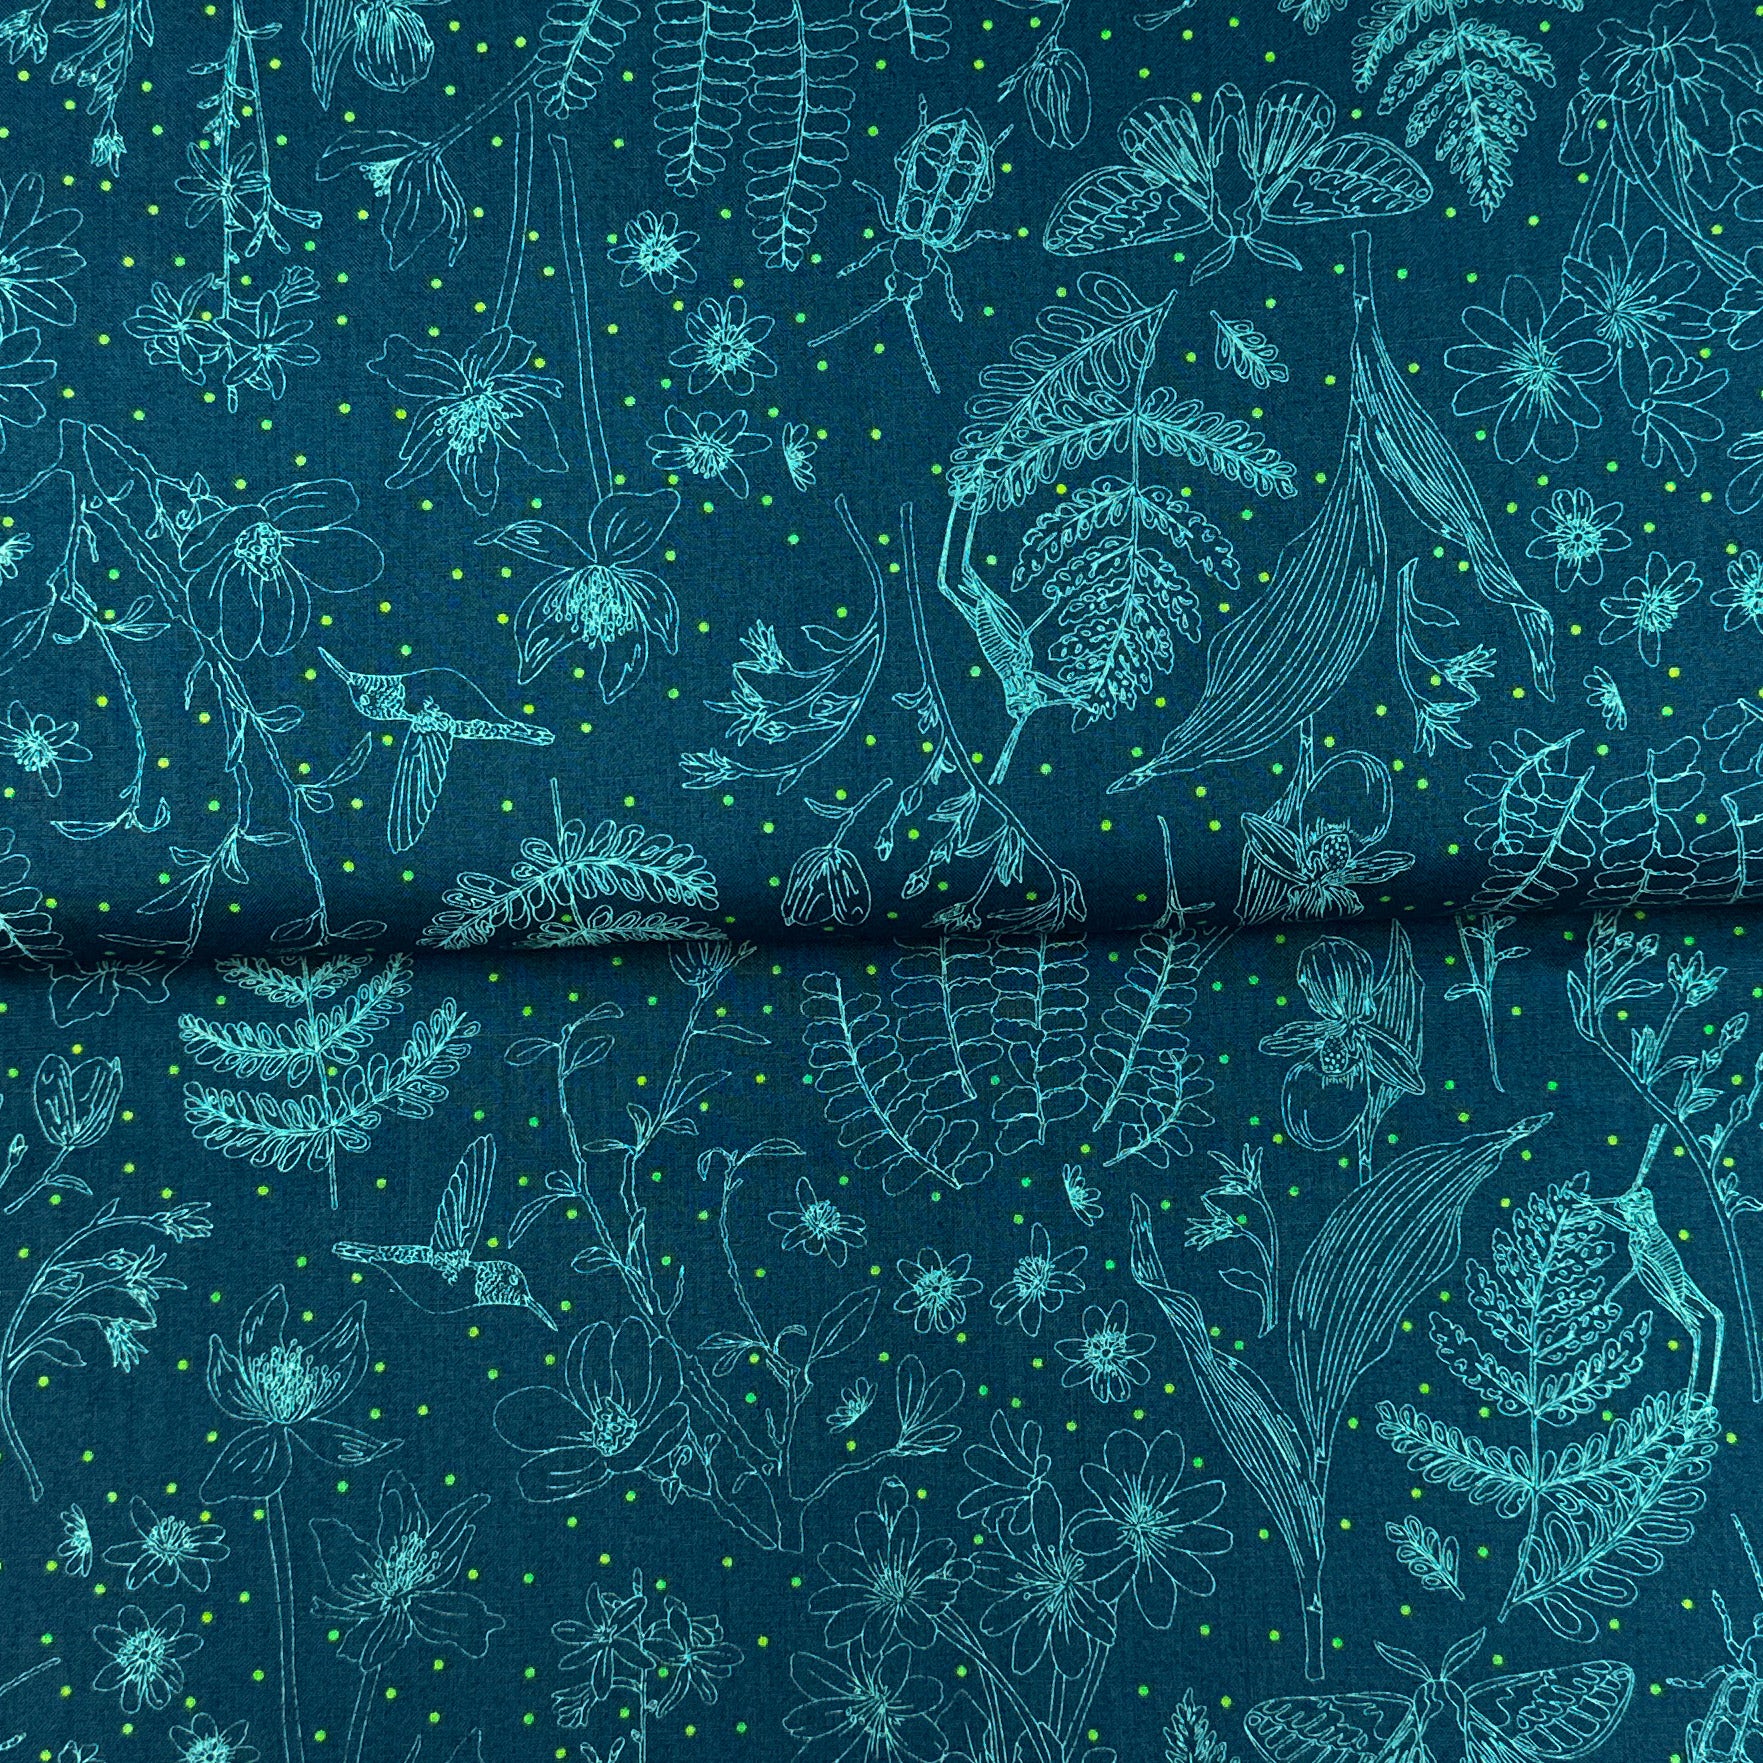 Galaxy- Anew by Tamara Kate - Cotton Quilt